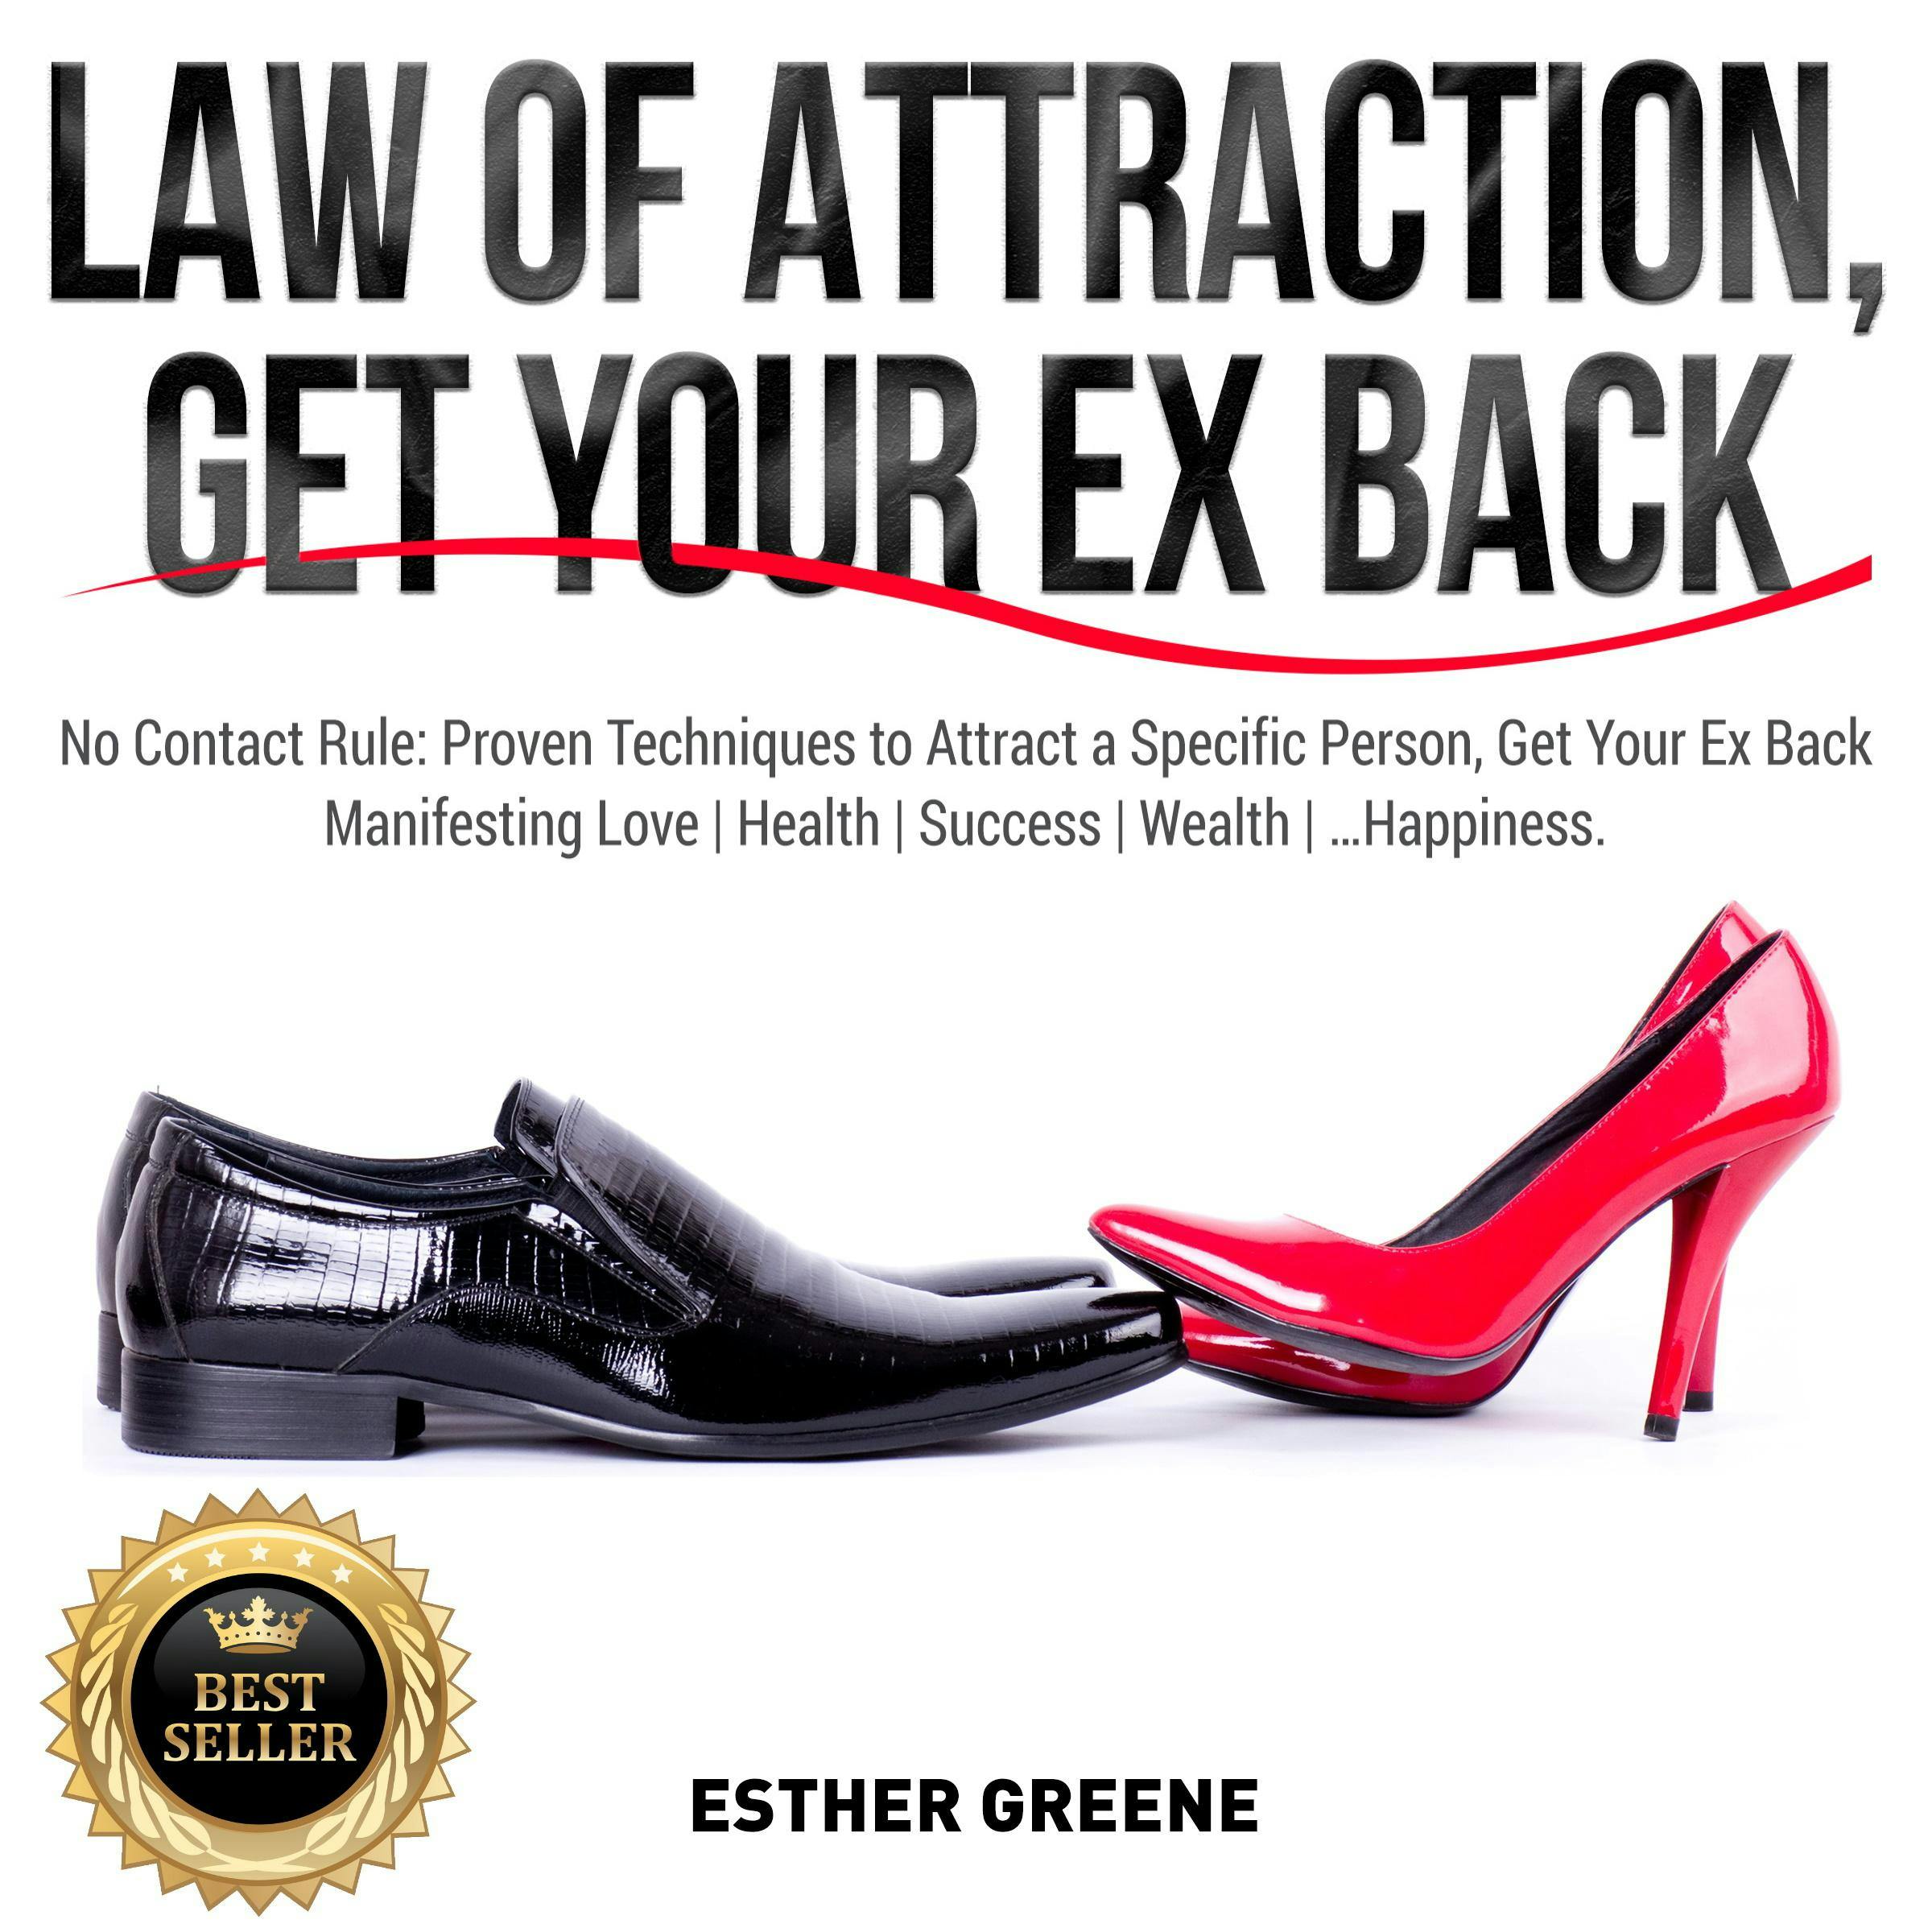 LAW OF ATTRACTION, GET YOUR EX BACK: No Contact Rule: Proven Techniques to Attract a Specific Person, Get Your Ex Back. Manifesting Love | Health | Success | Wealth | …Happiness. NEW VERSION - ESTHER GREENE